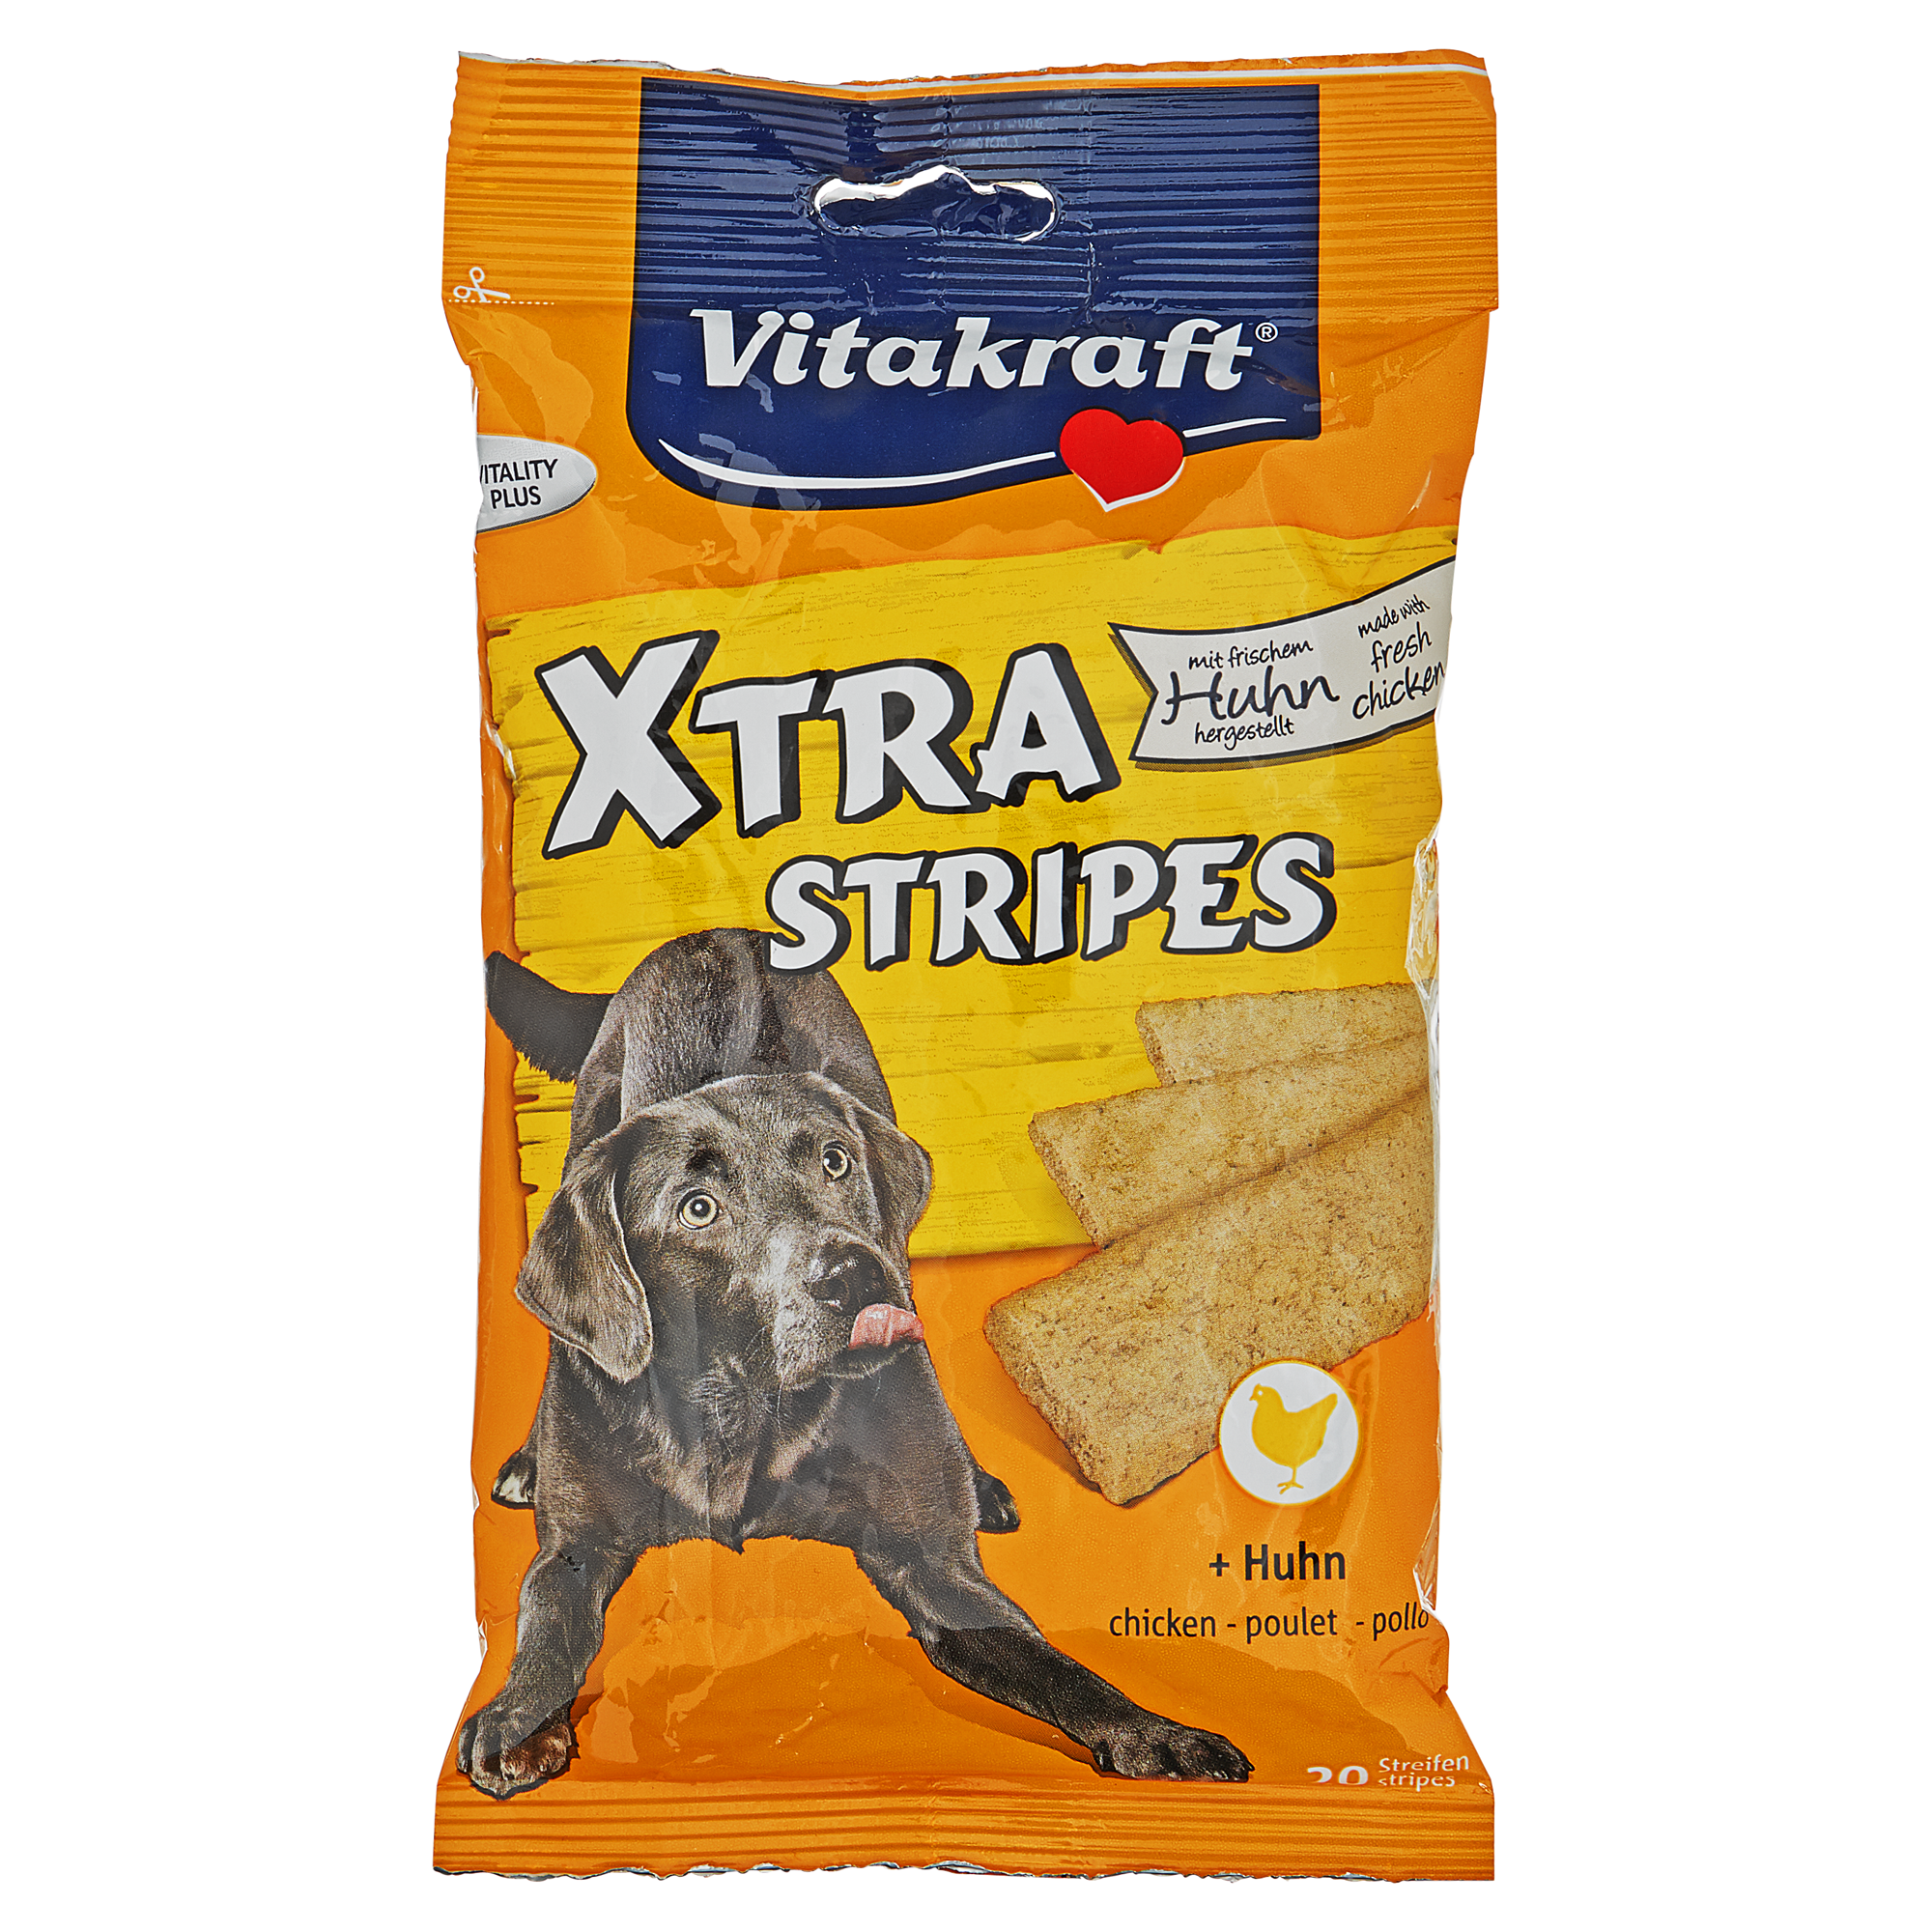 Hundesnack "Xtra Stripes" mit Huhn 20 Stück + product picture